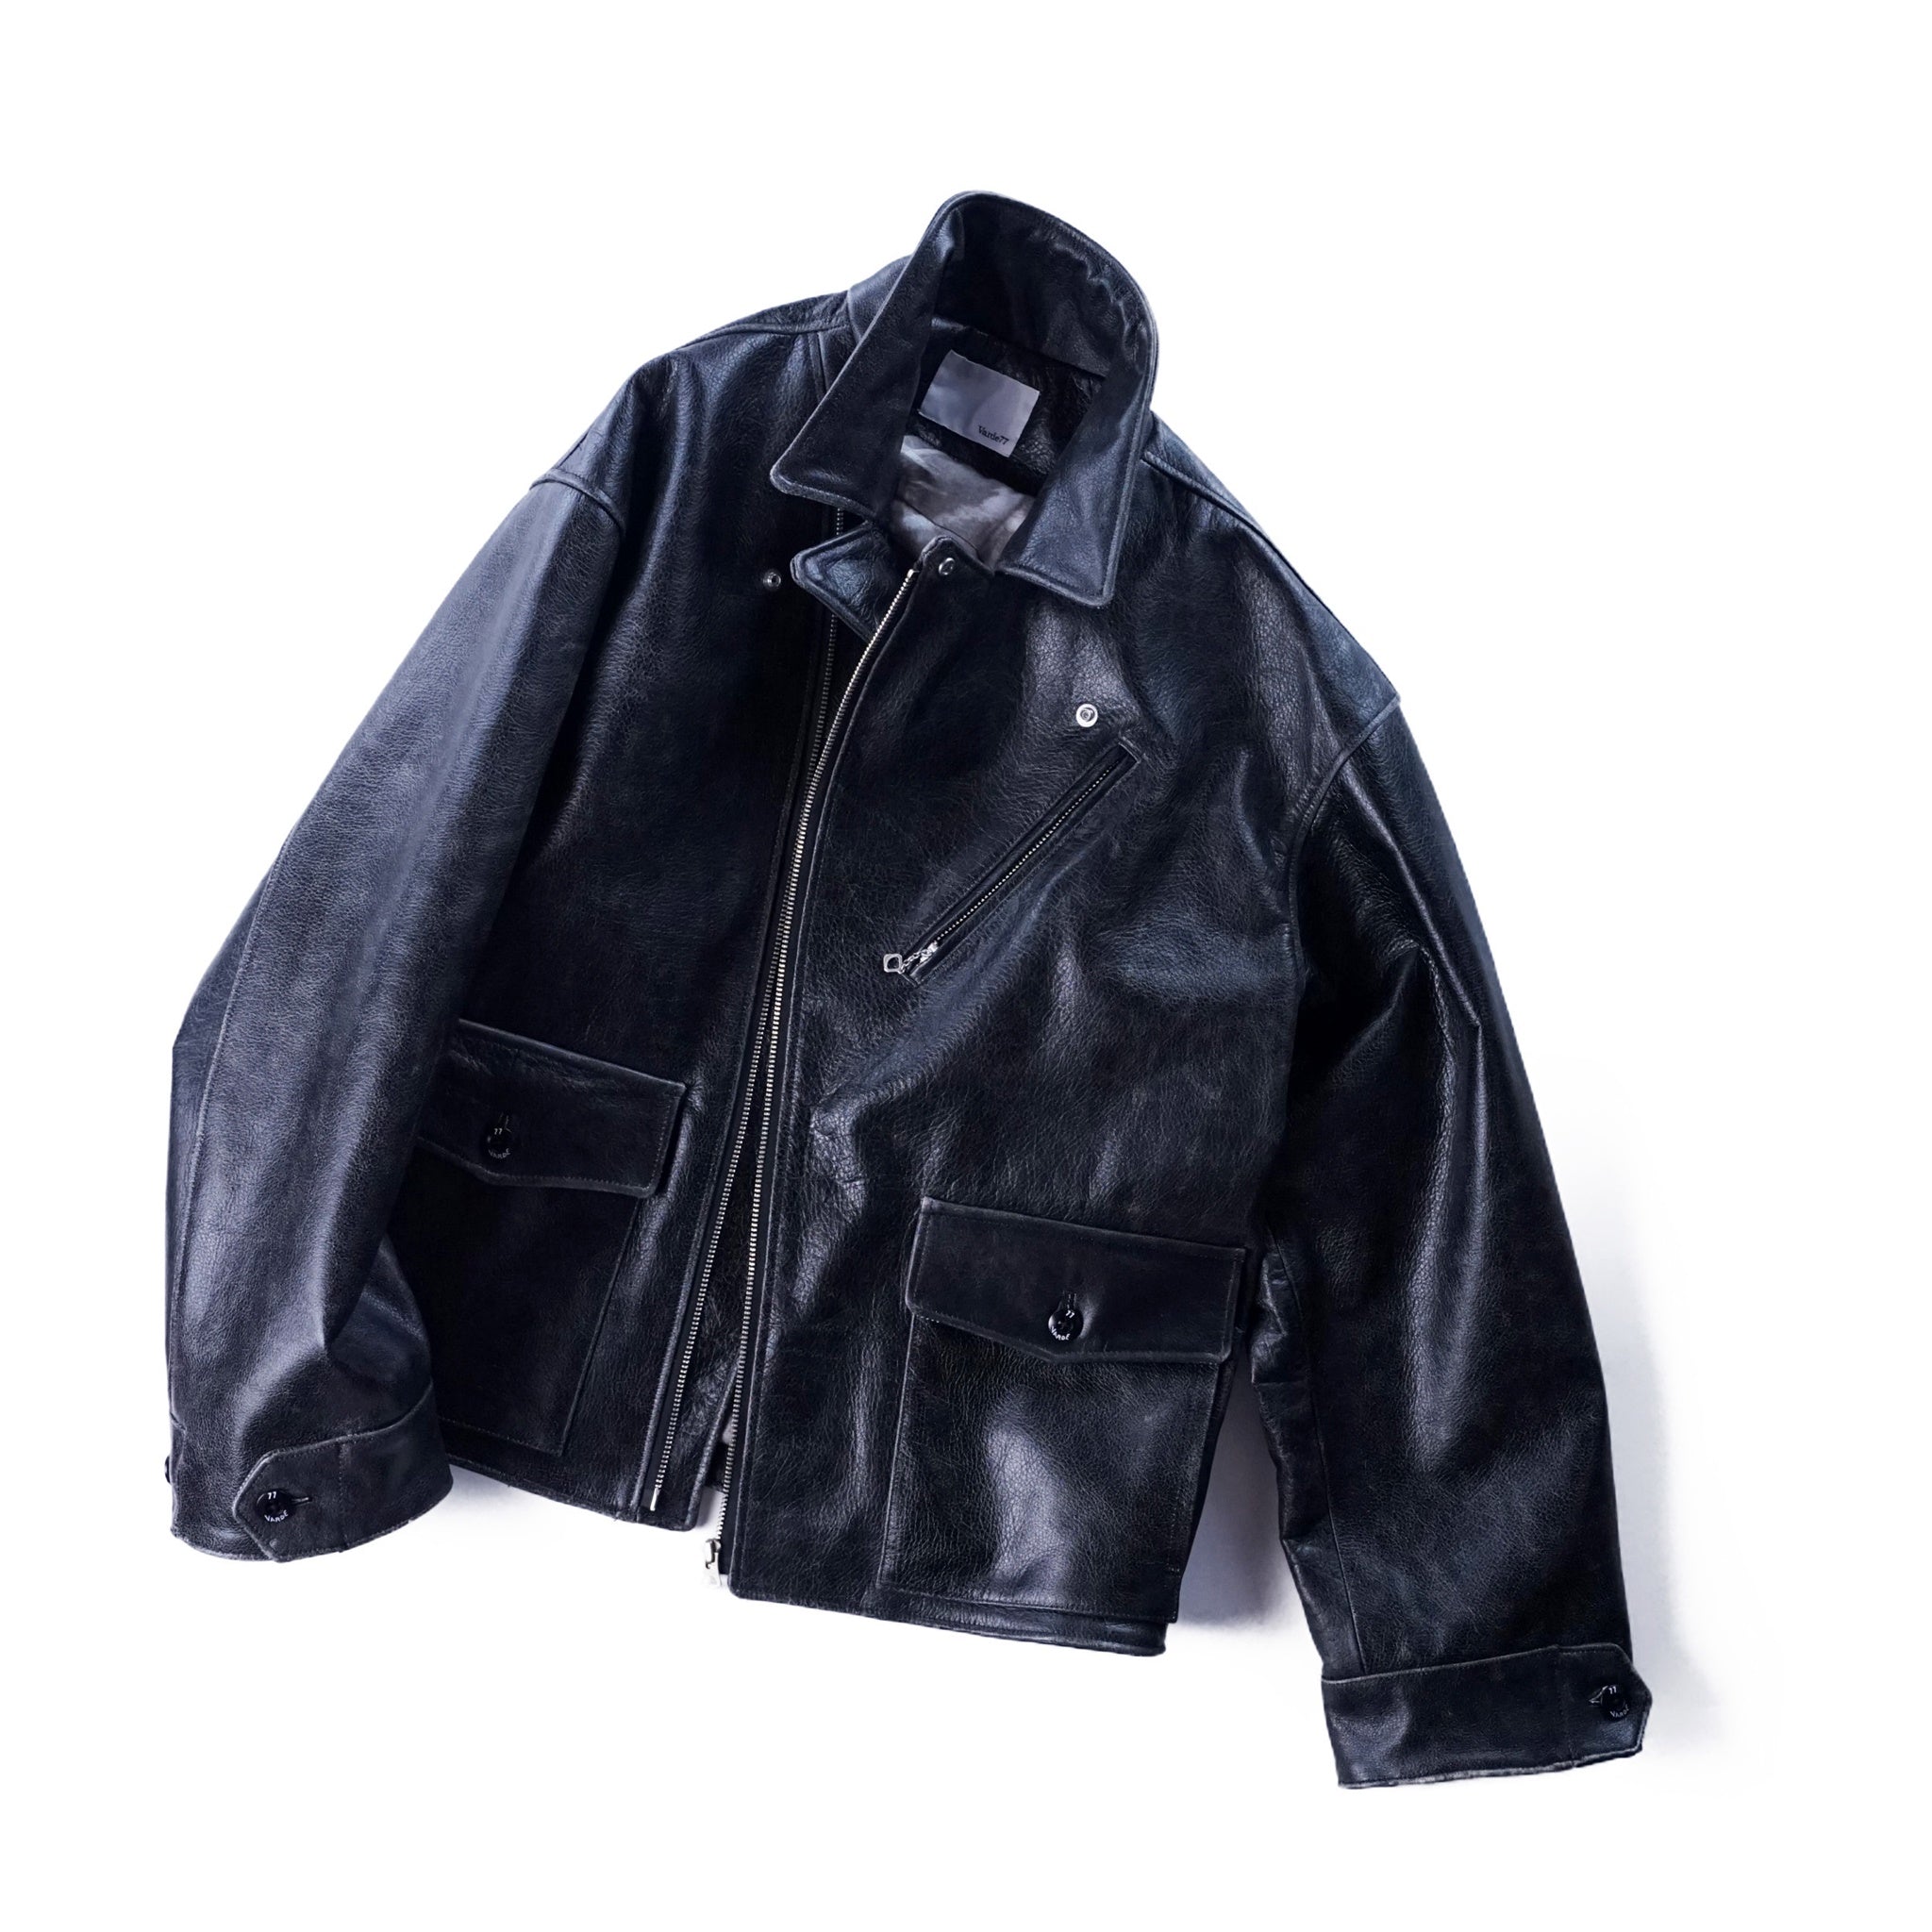 No:VR22SP-SD-LJ02 | Name:Crack leather double wide jacket | Color:Blac